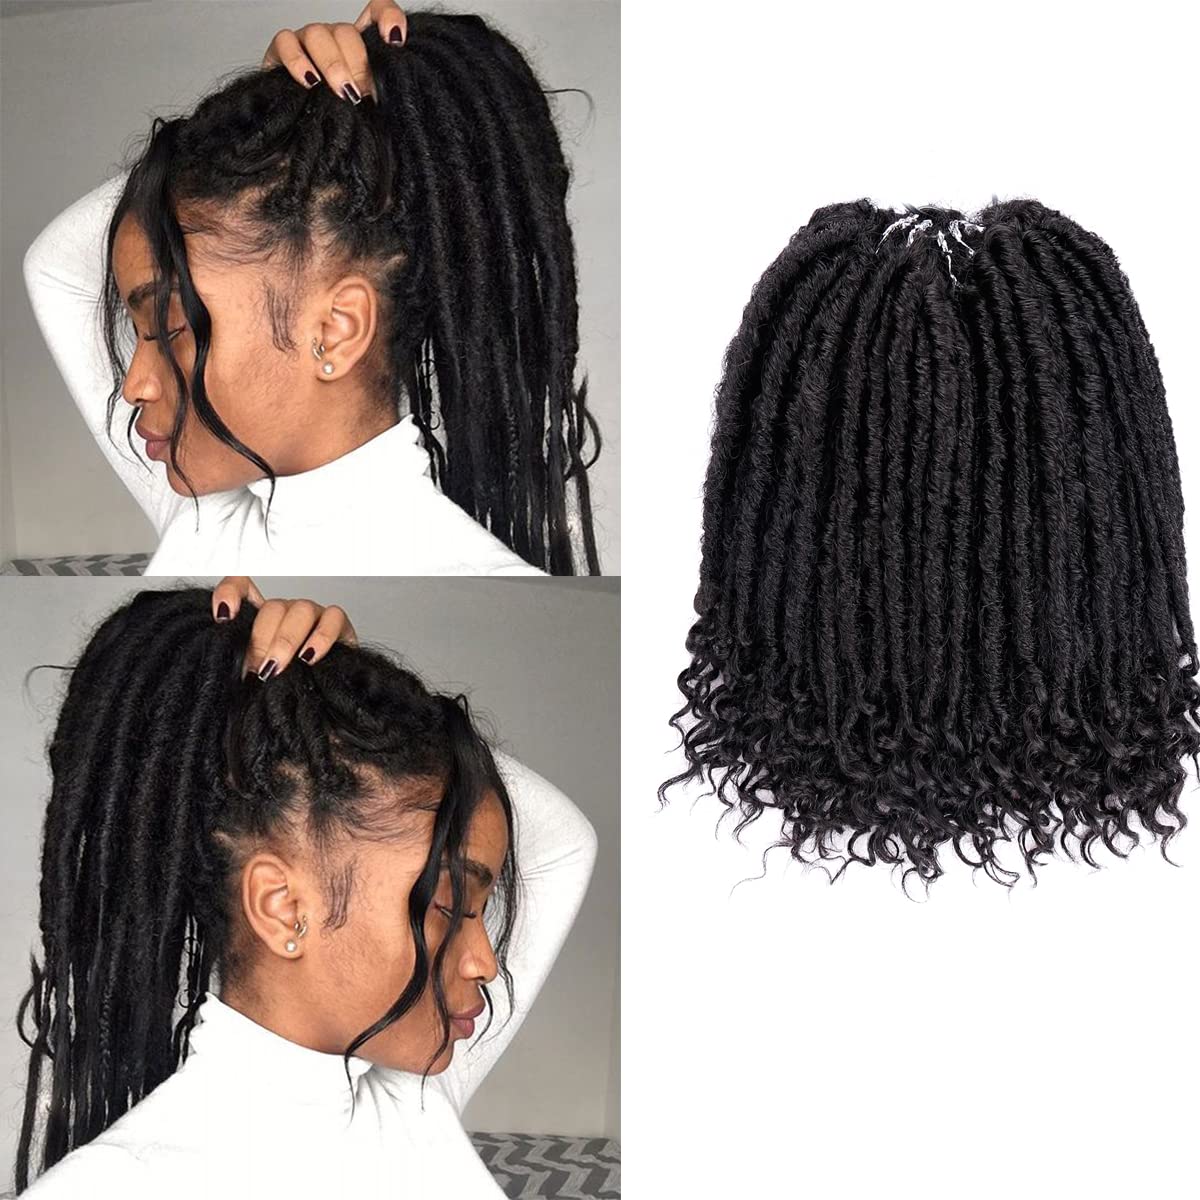 Goddess Locs Crochet Hair - 10 Inch, 7 Packs, Curly Faux Locs for